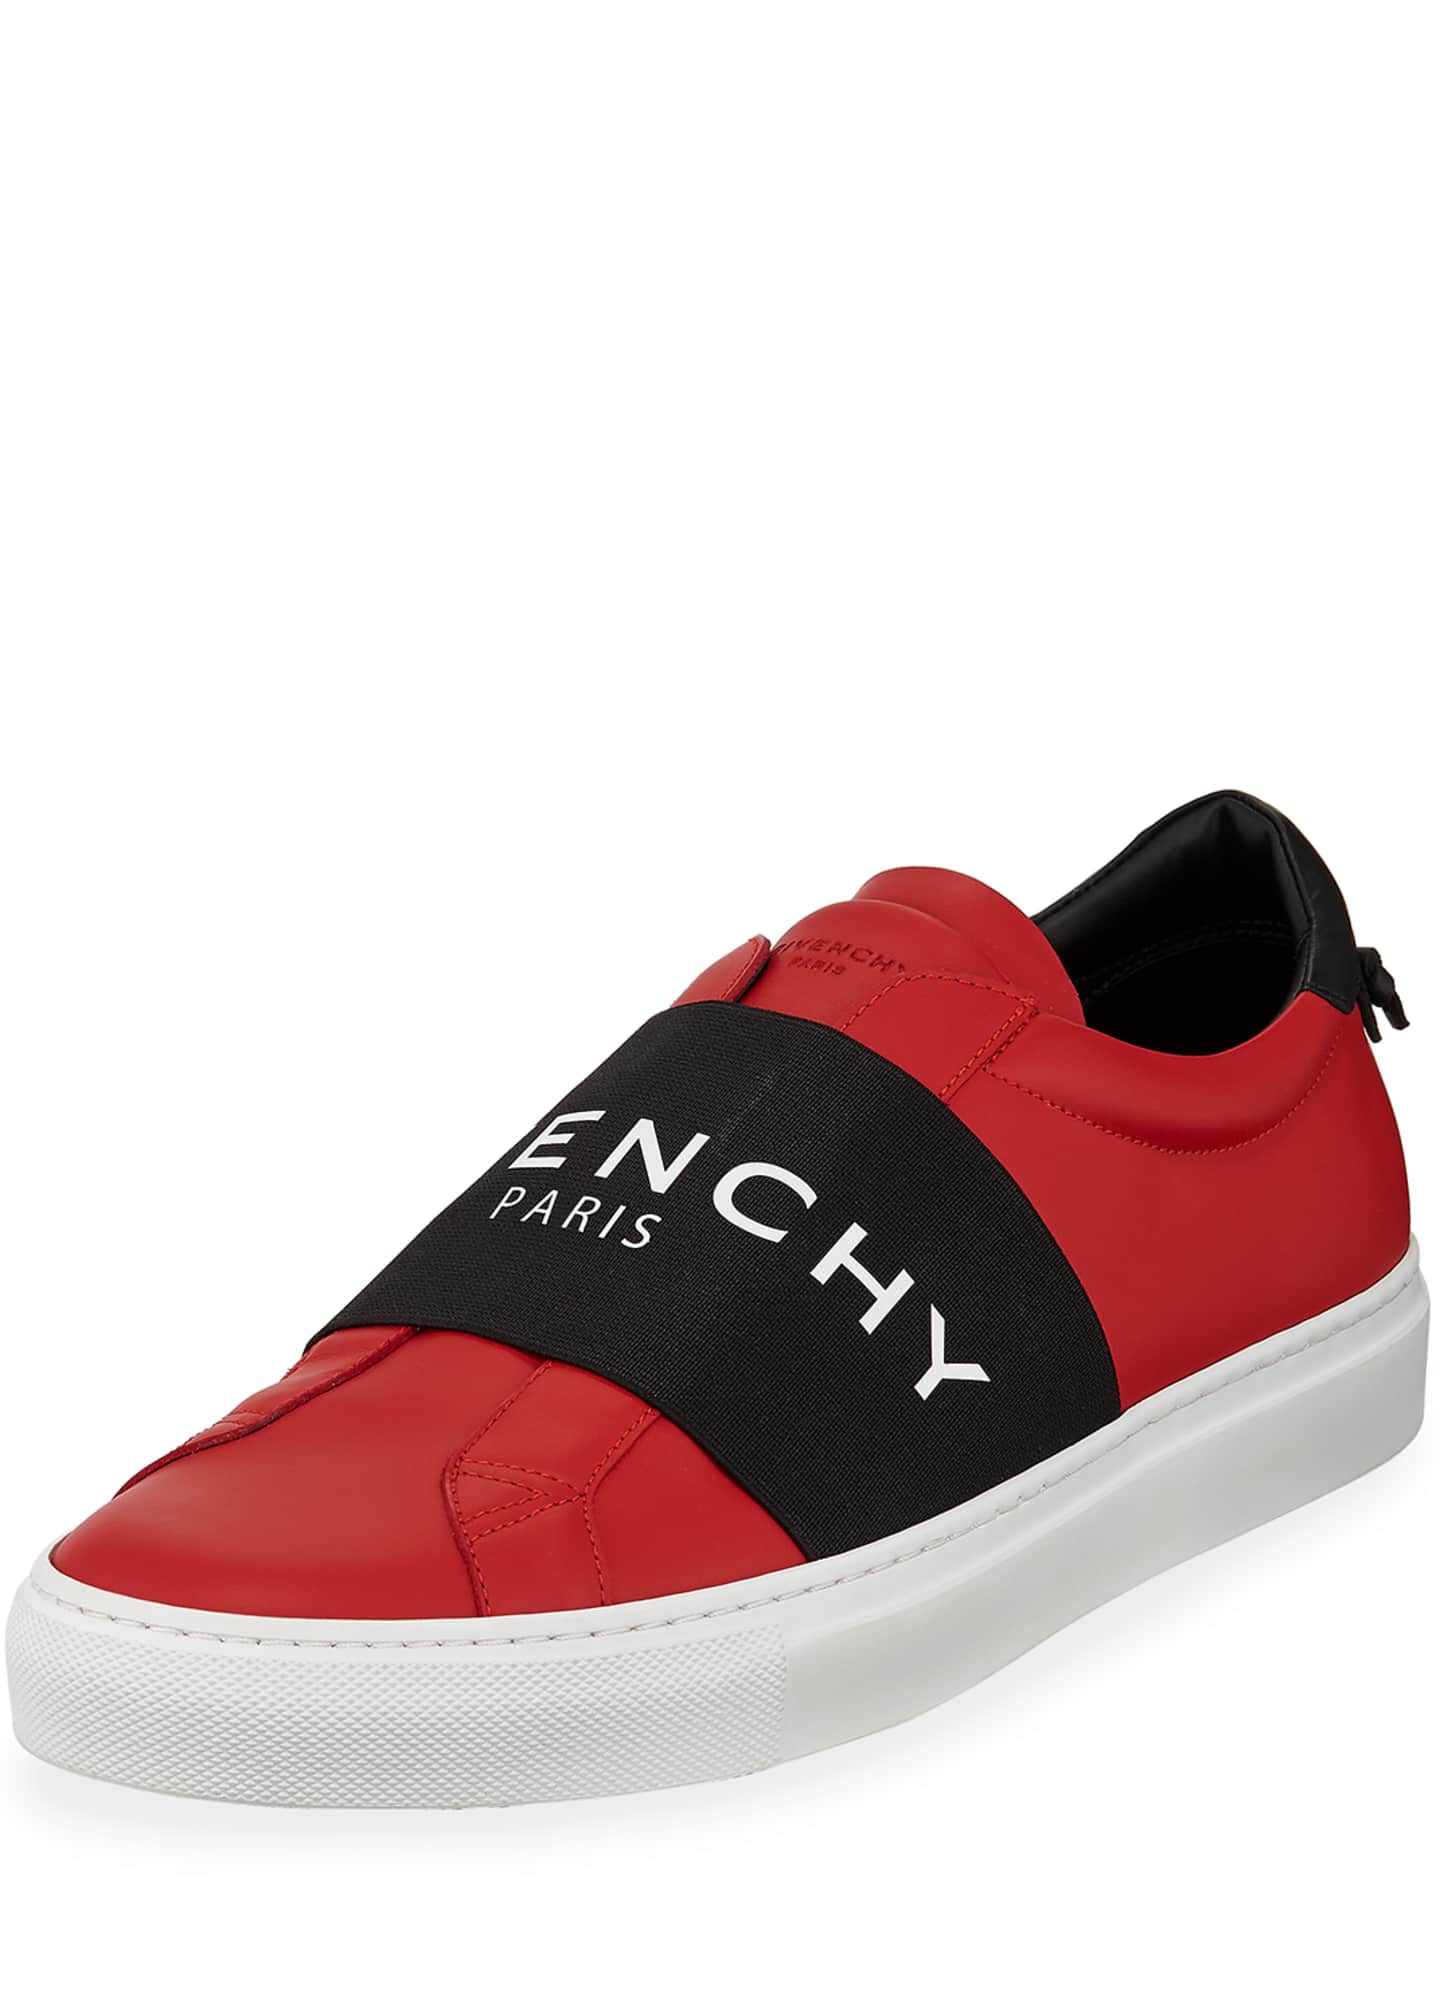 givenchy shoes red